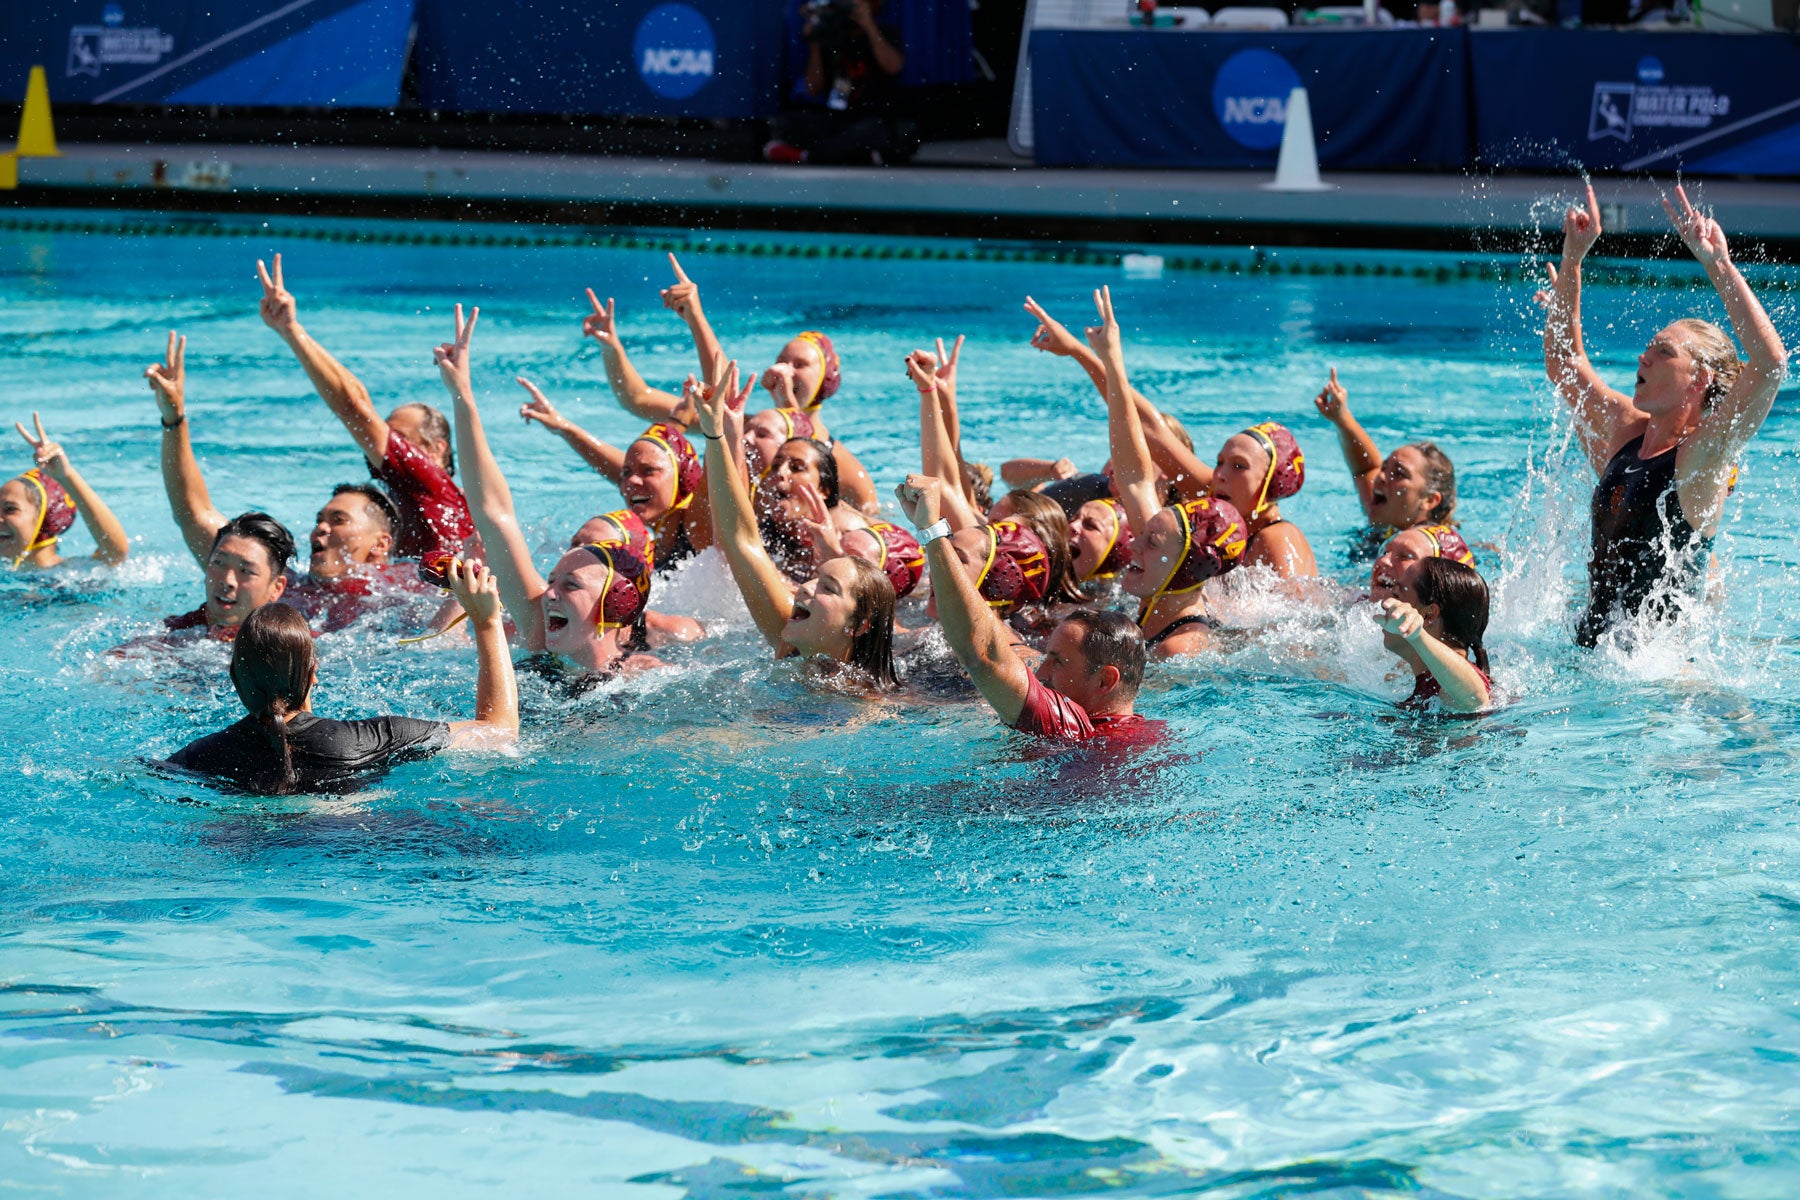 USC sports highlights 2018: women's water polo